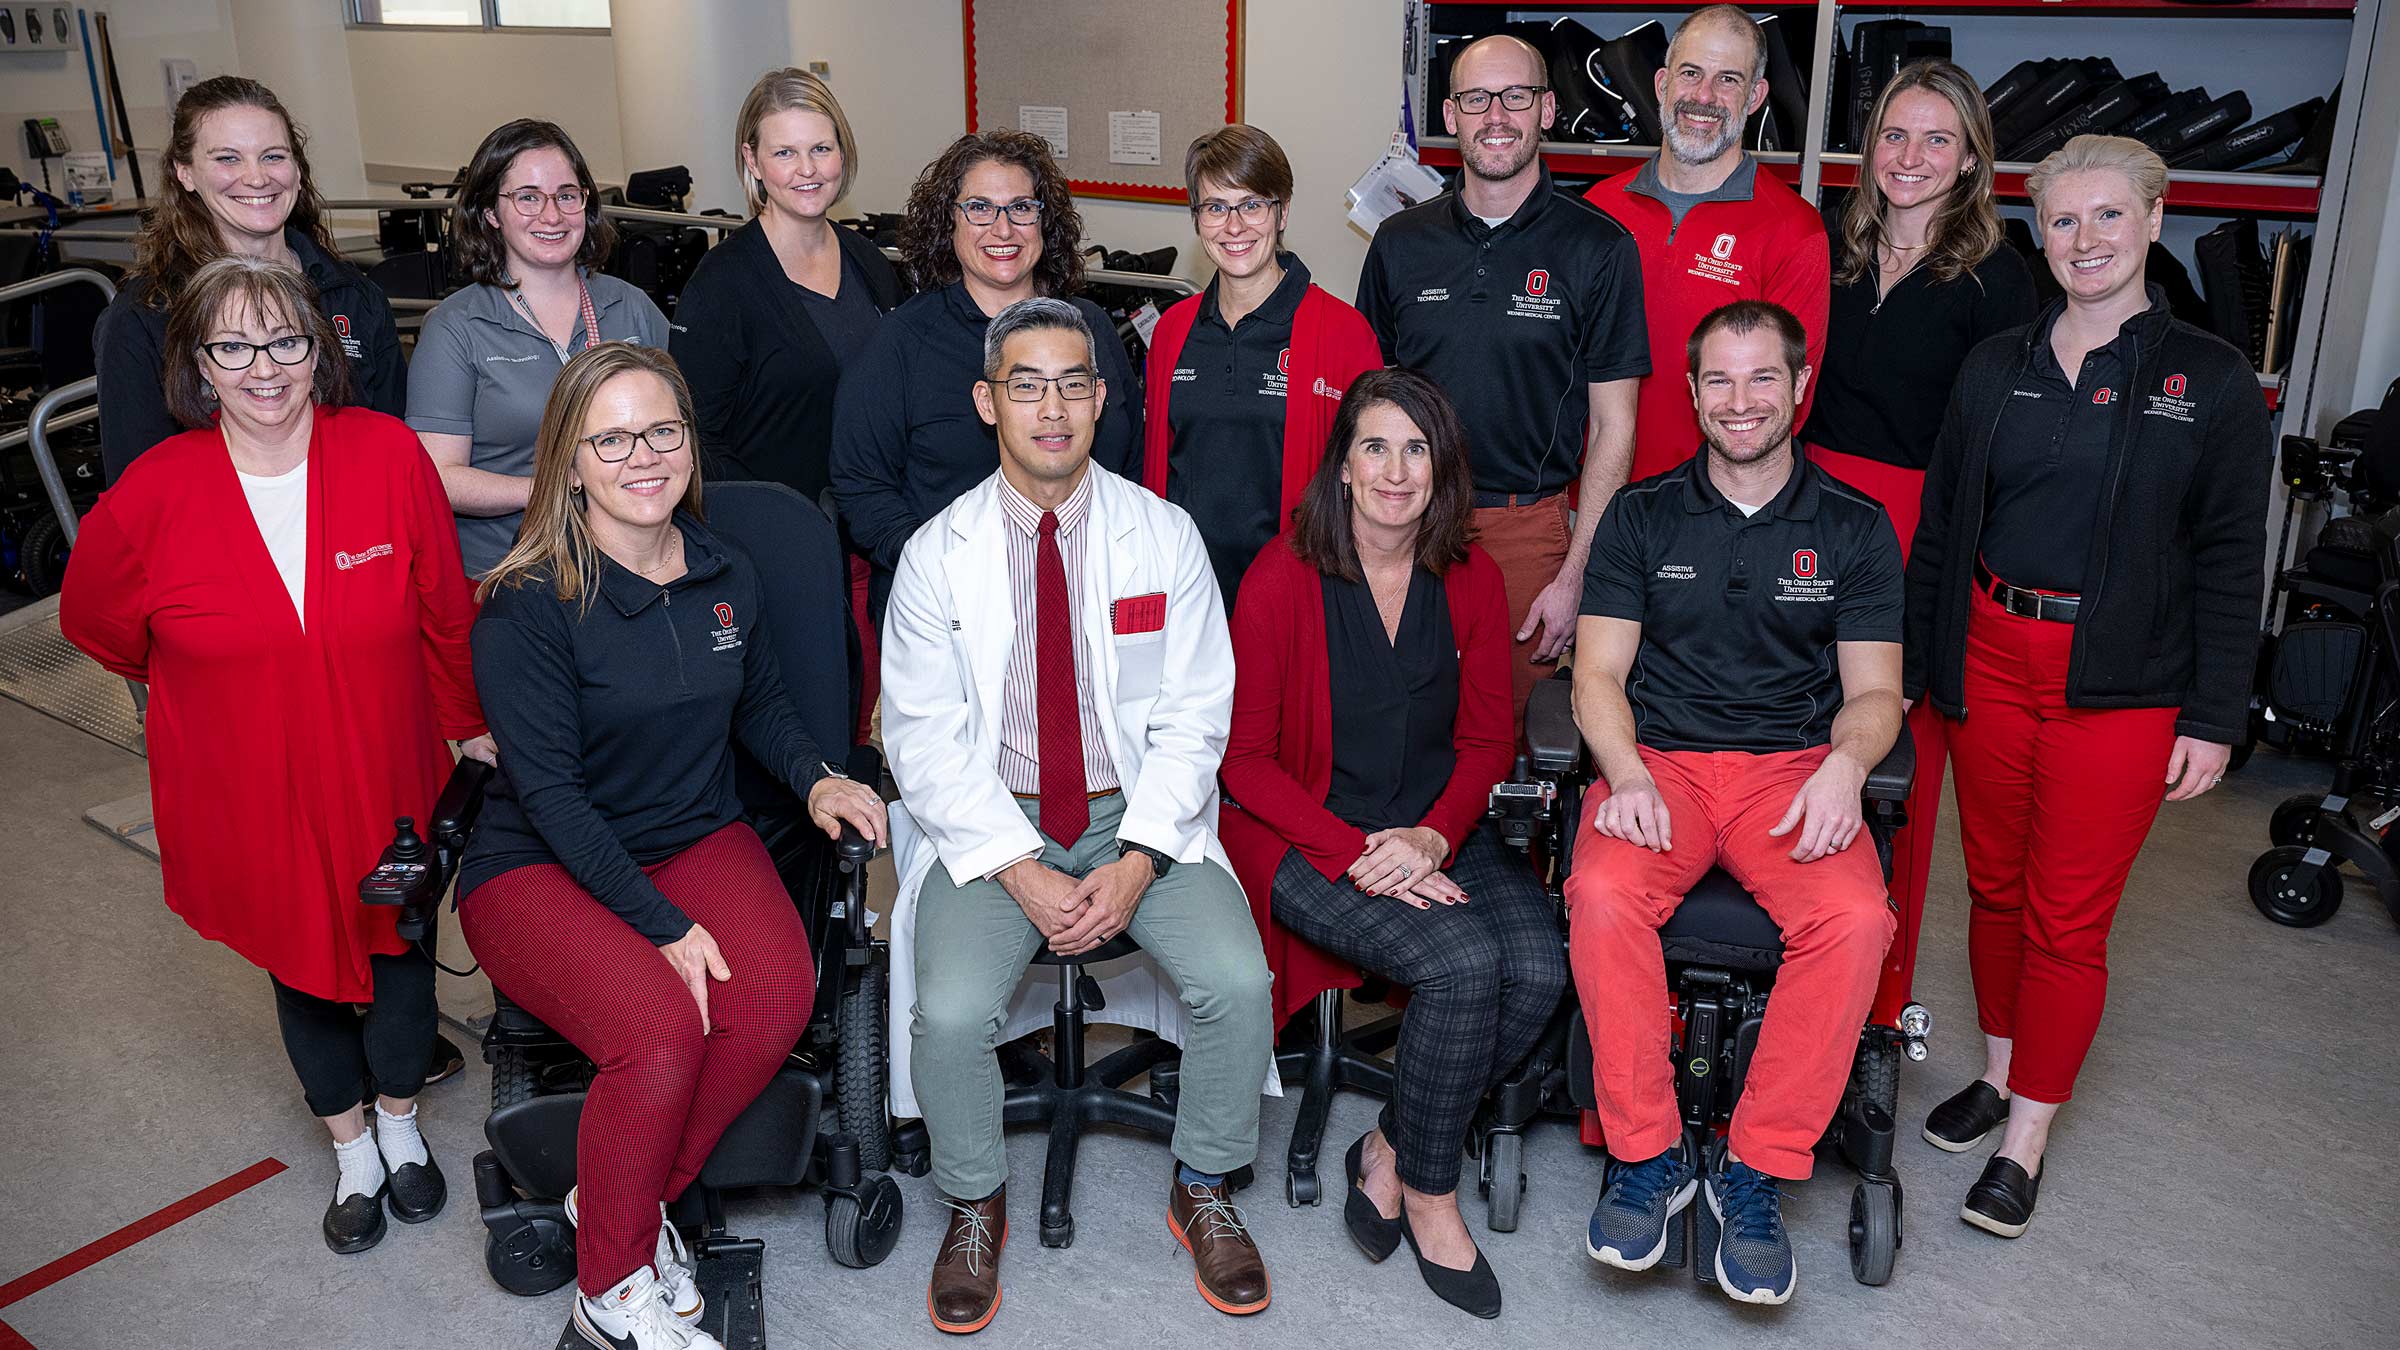 Daniel Kim, MD, and his team at Ohio State's Assistive Technology Center